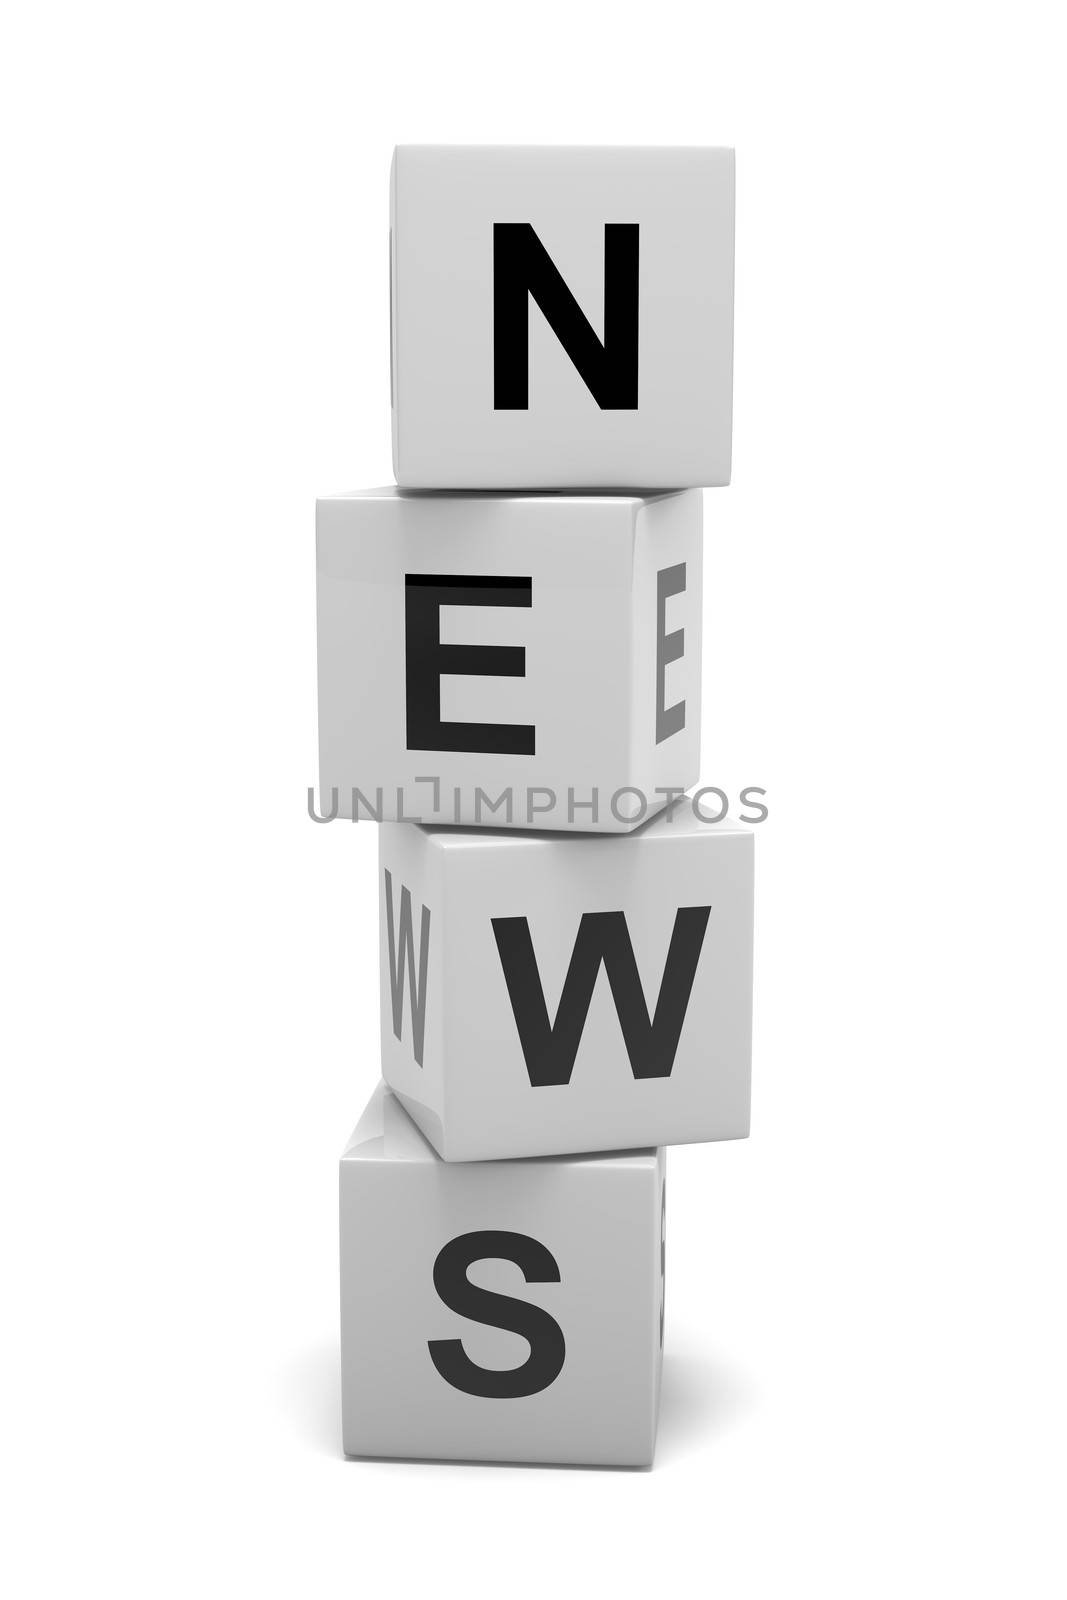 Cube News by make